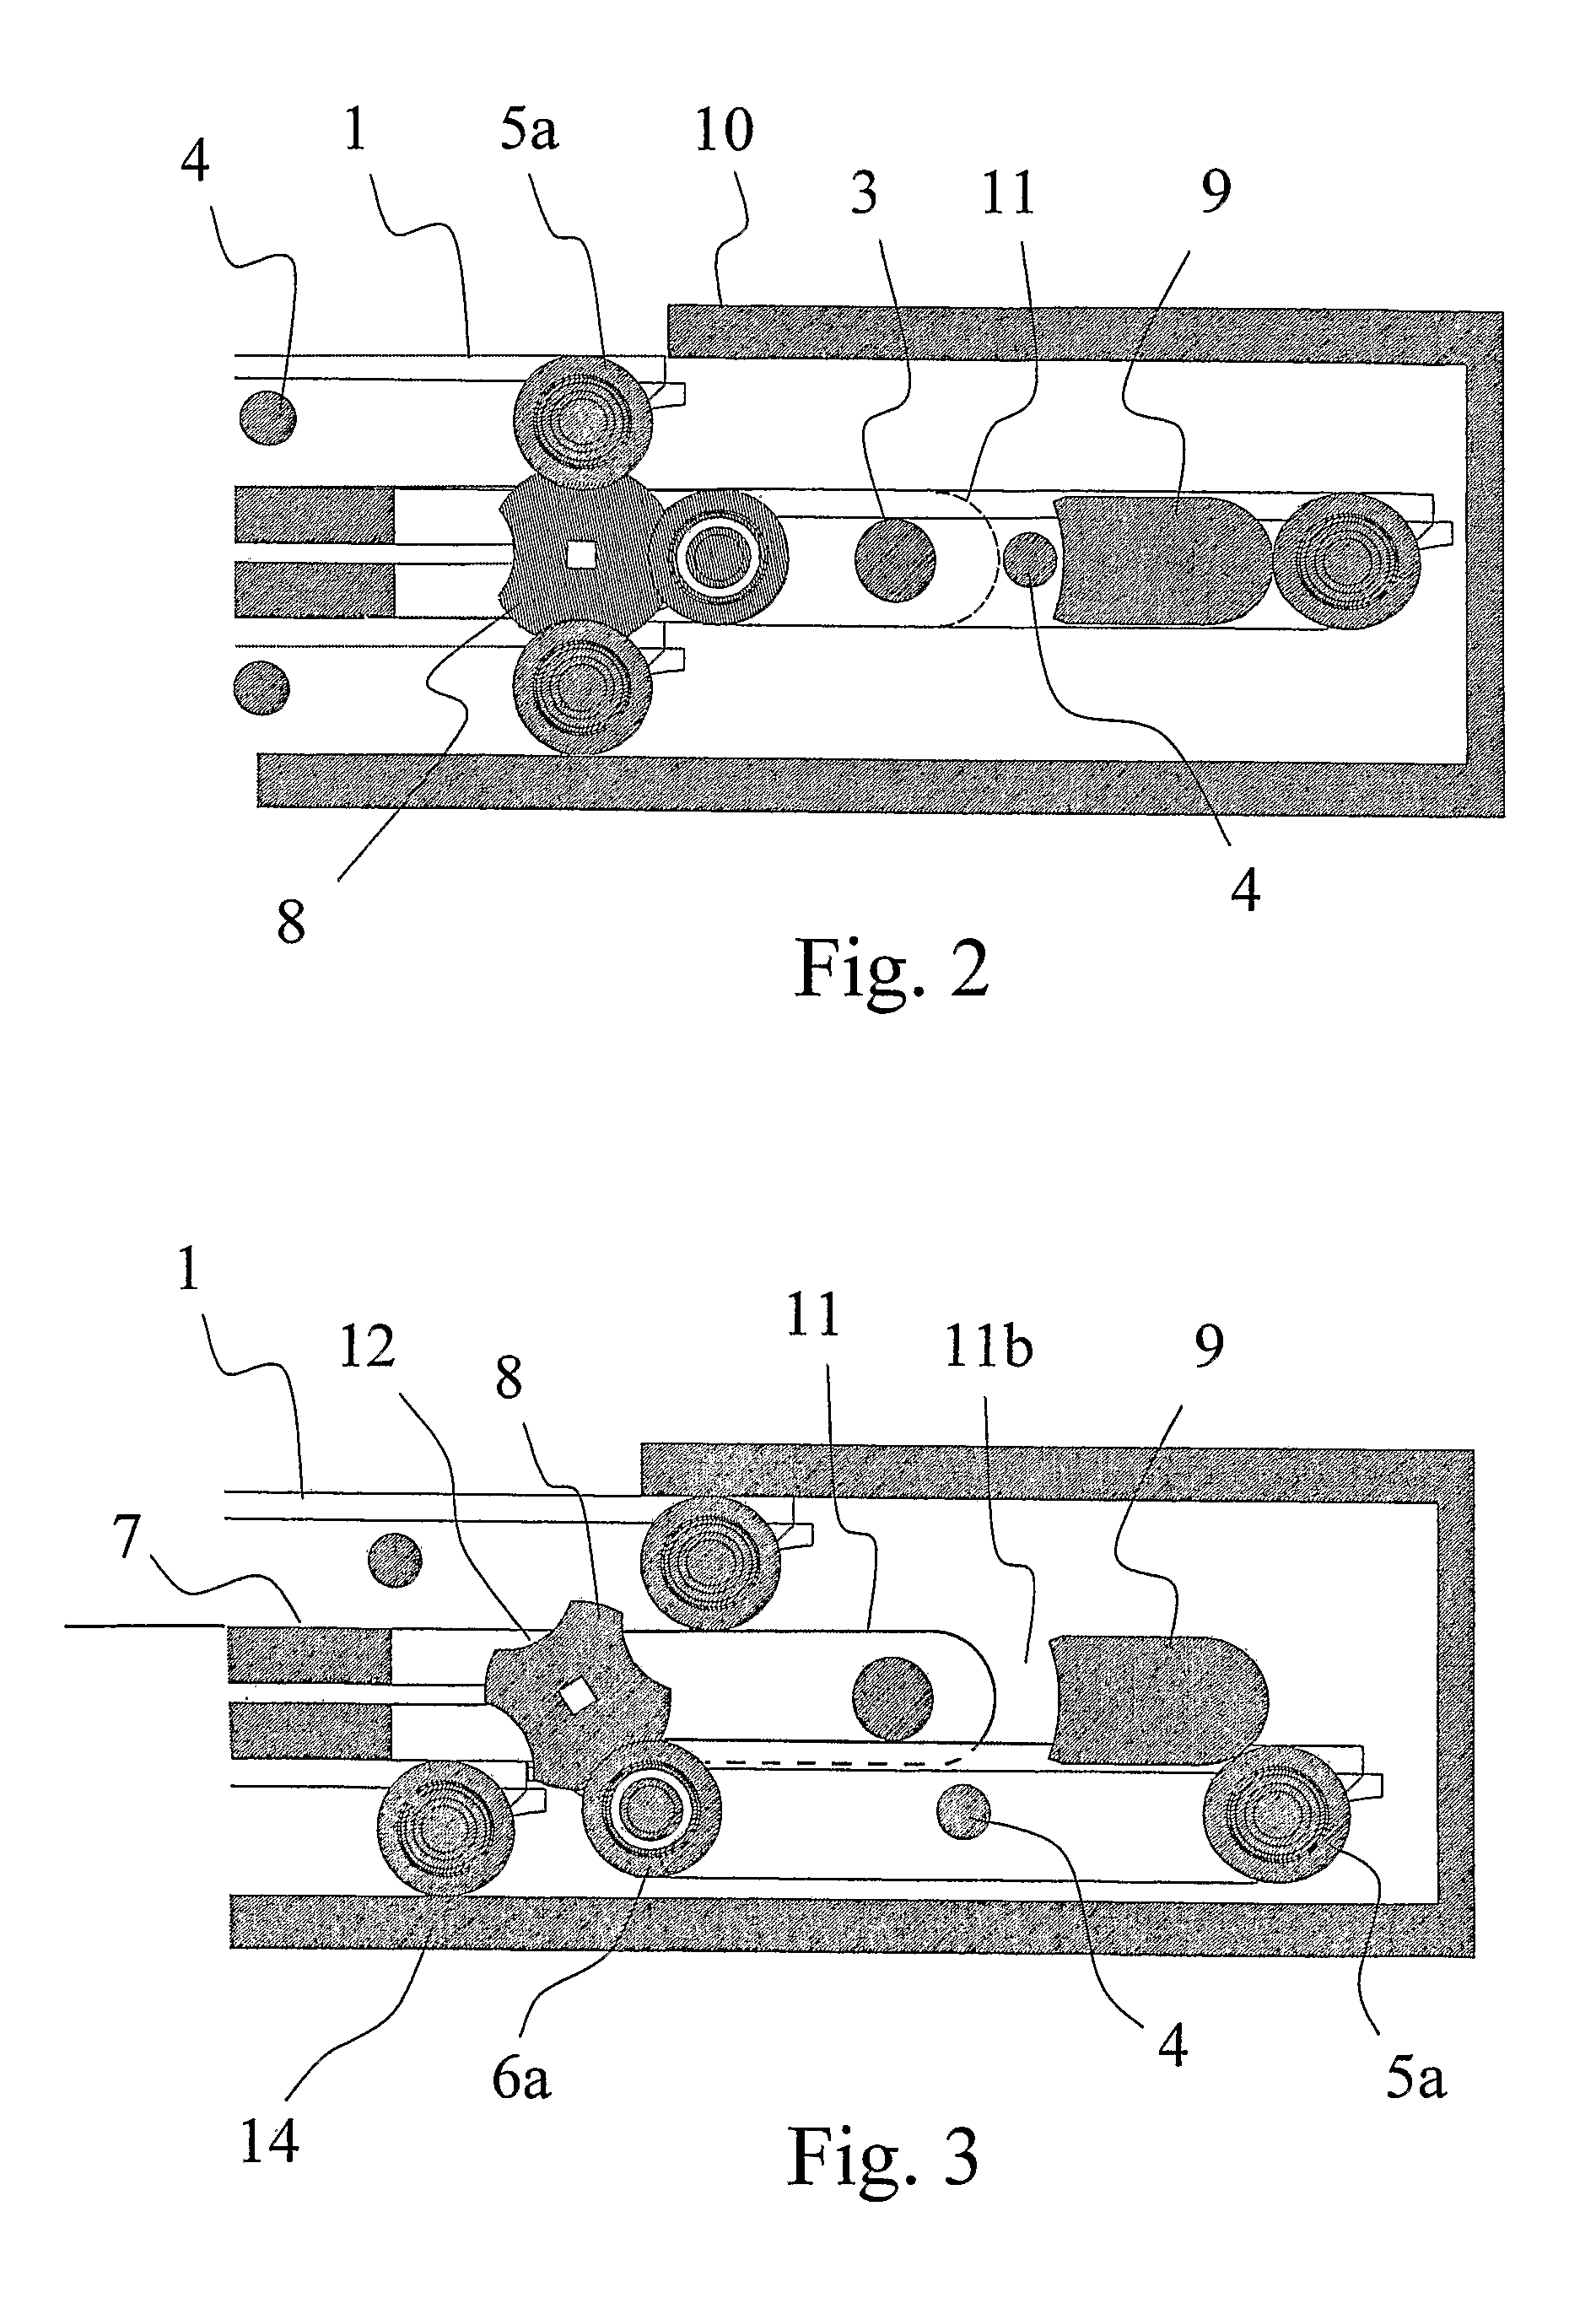 Method and apparatus for moving a pallet running on wheels in a travelator or equivalent